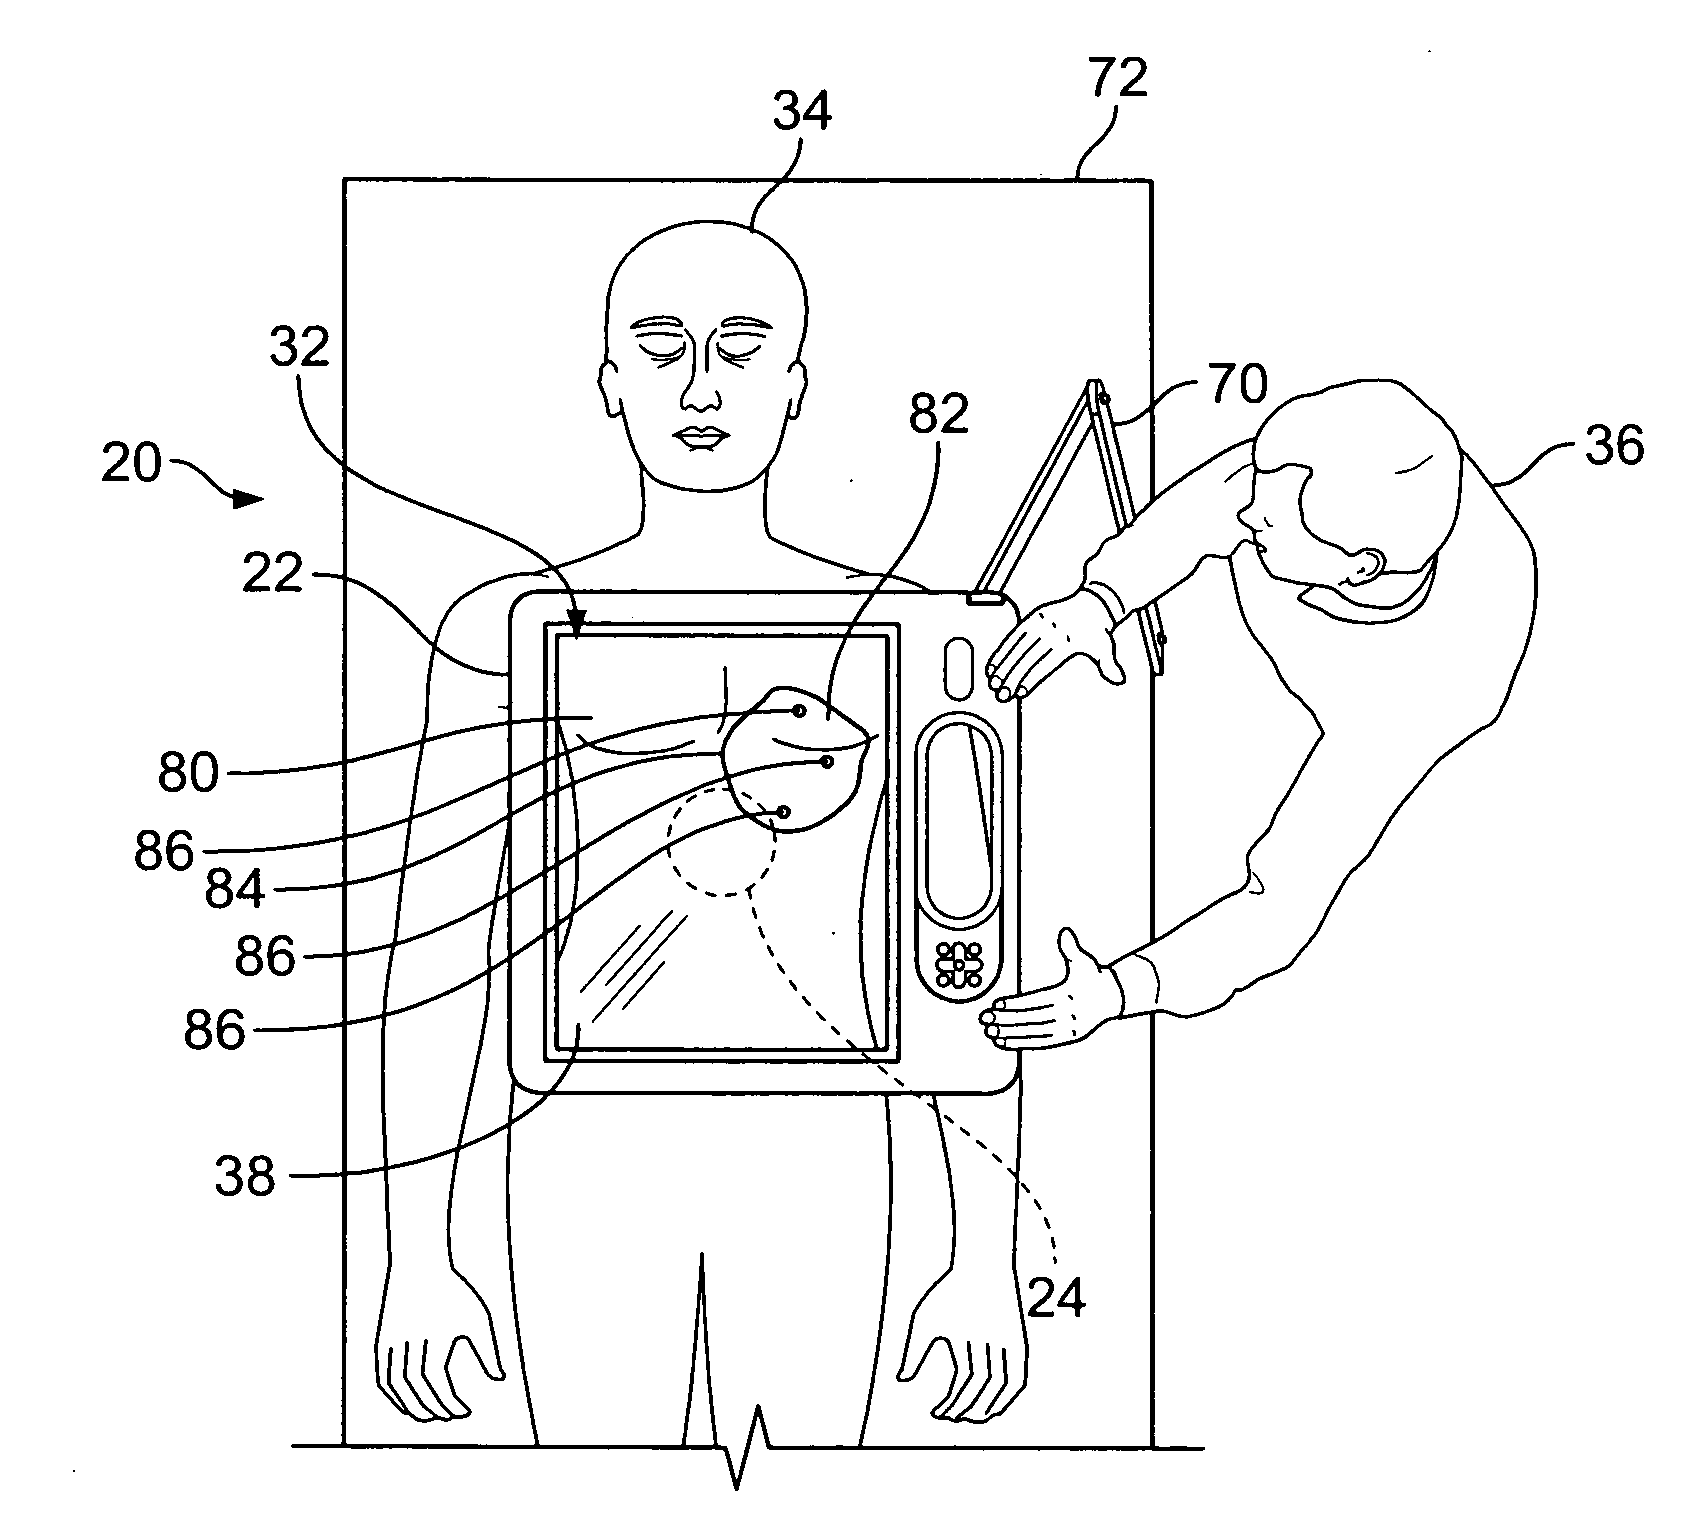 System for and method of visualizing an interior of body